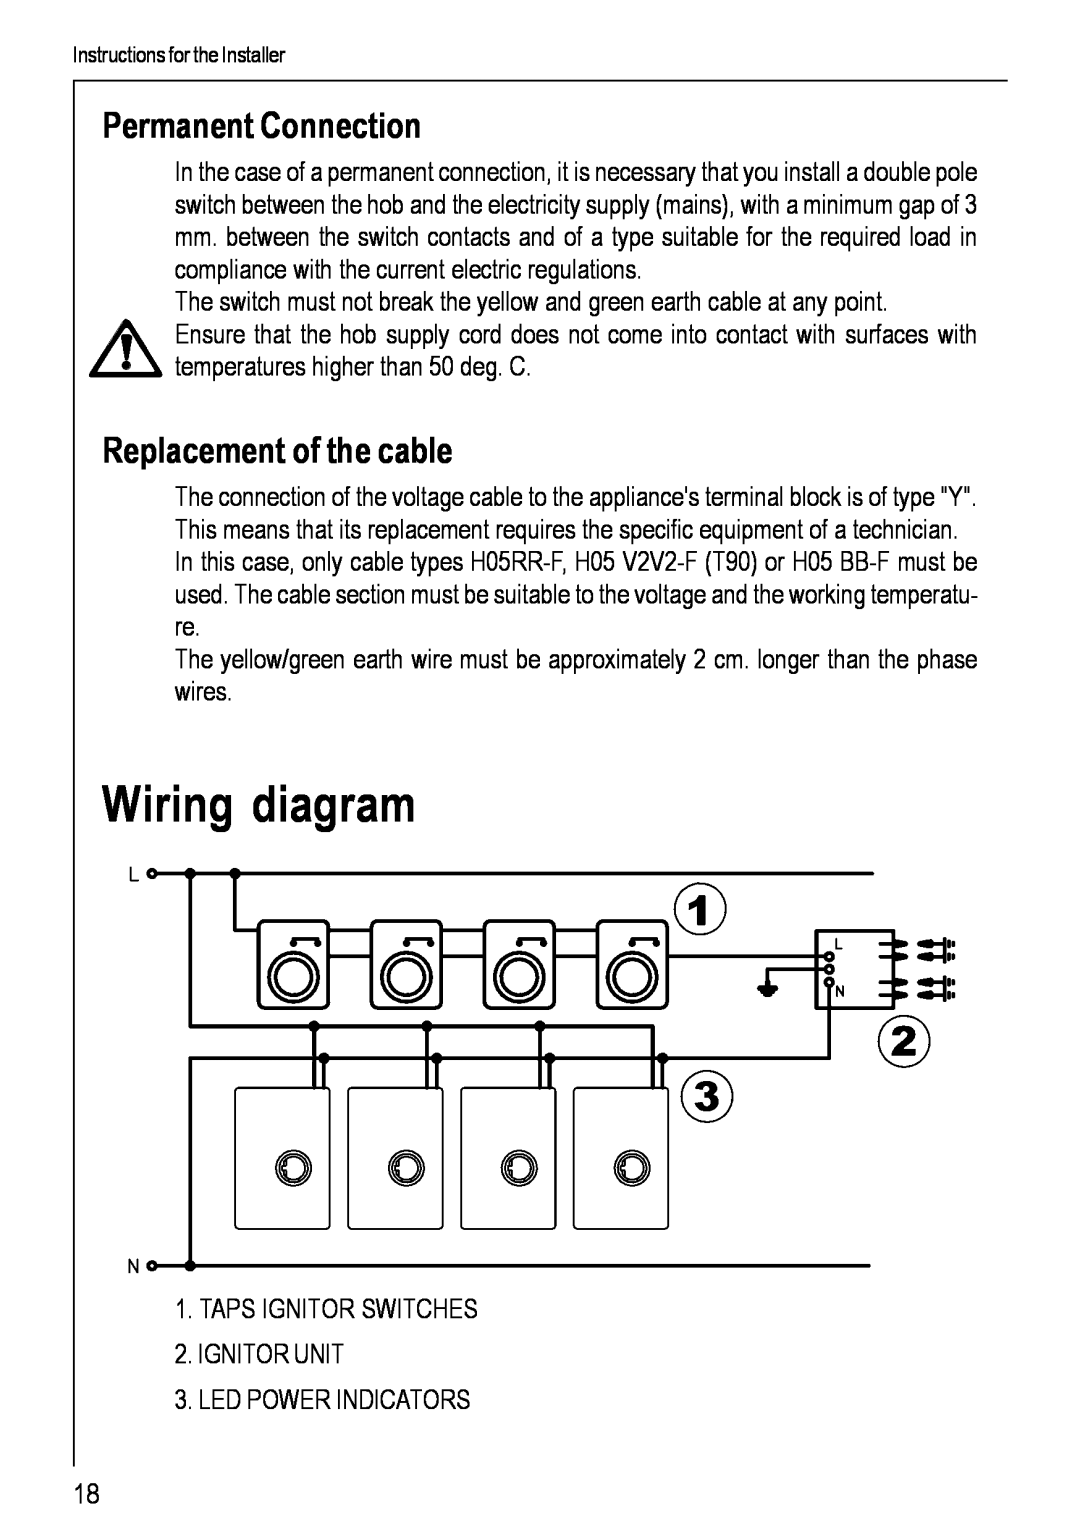 Electrolux 69802 G manual Wiring diagram, Permanent Connection, Replacement of the cable 